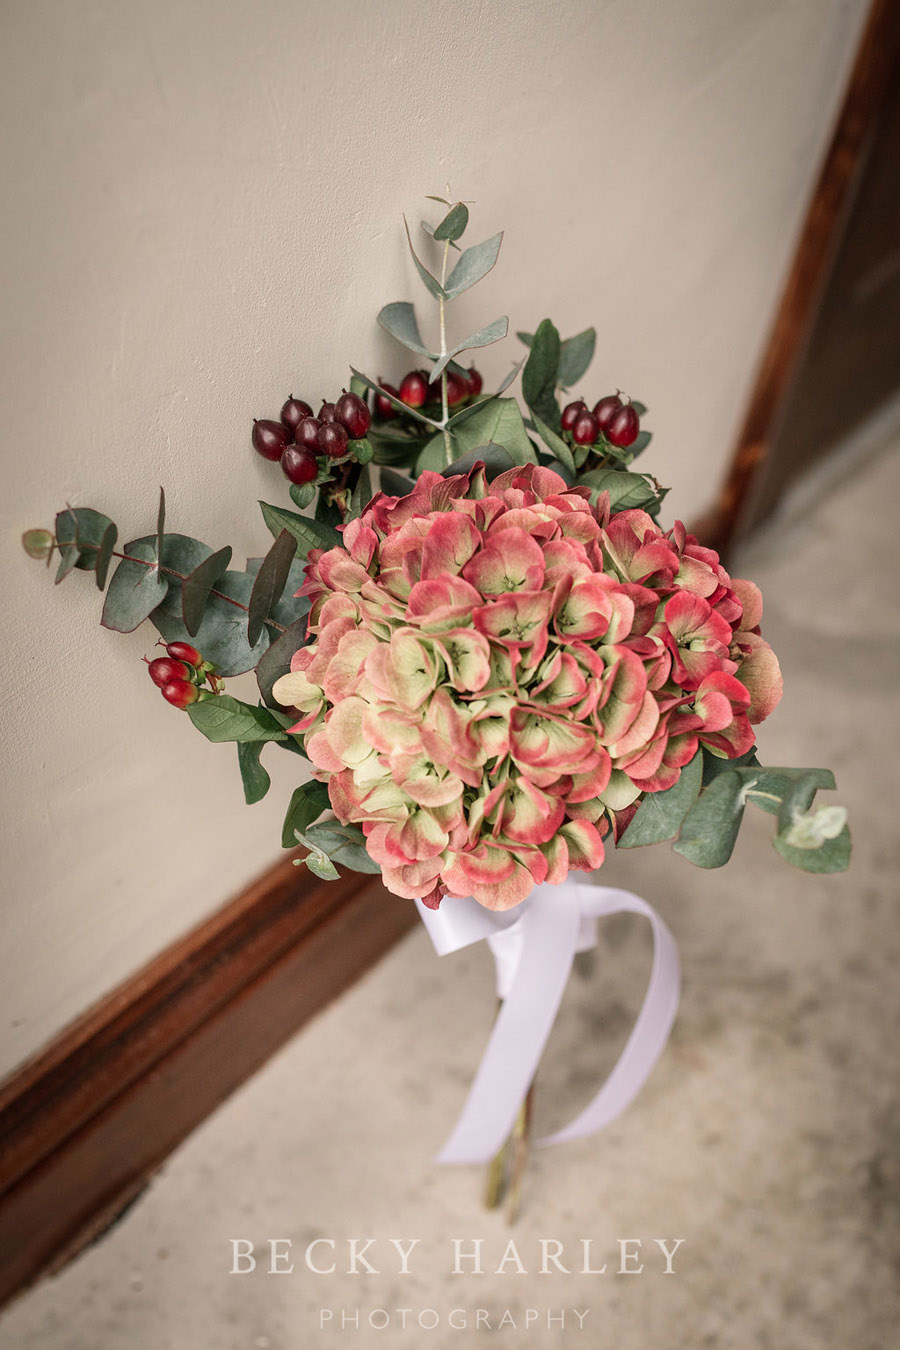 A massive ball of mistletoe for a beautifully styled, elegant winter wedding. Images by Becky Harley Photography (10)